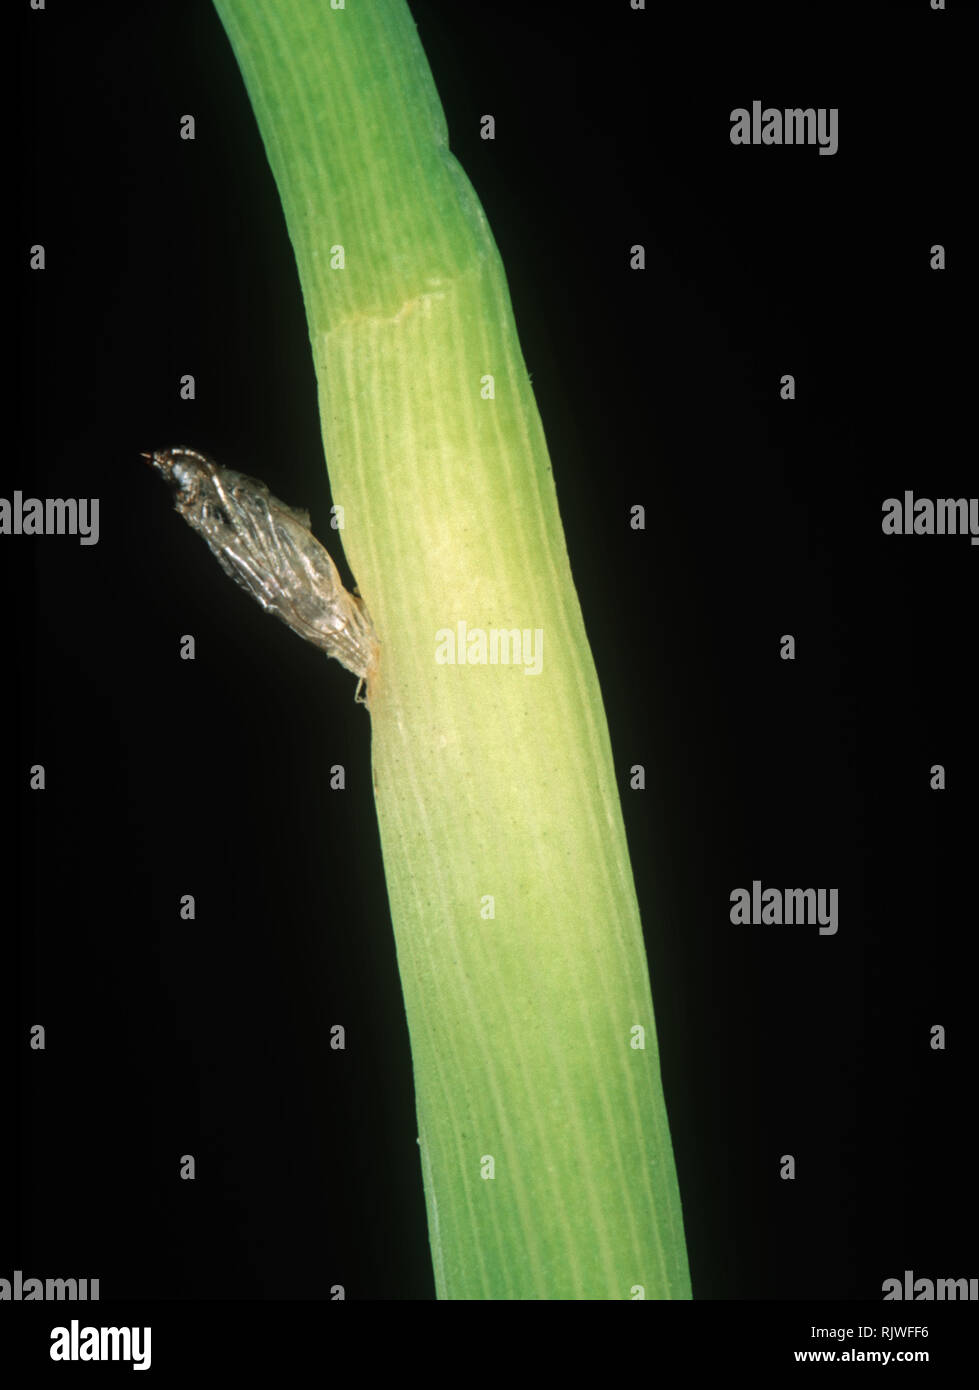 Asian rice gall midge, Orseolia oryza, hatched pupal case emerged from a rice stem, Luzon, Philippines Stock Photo